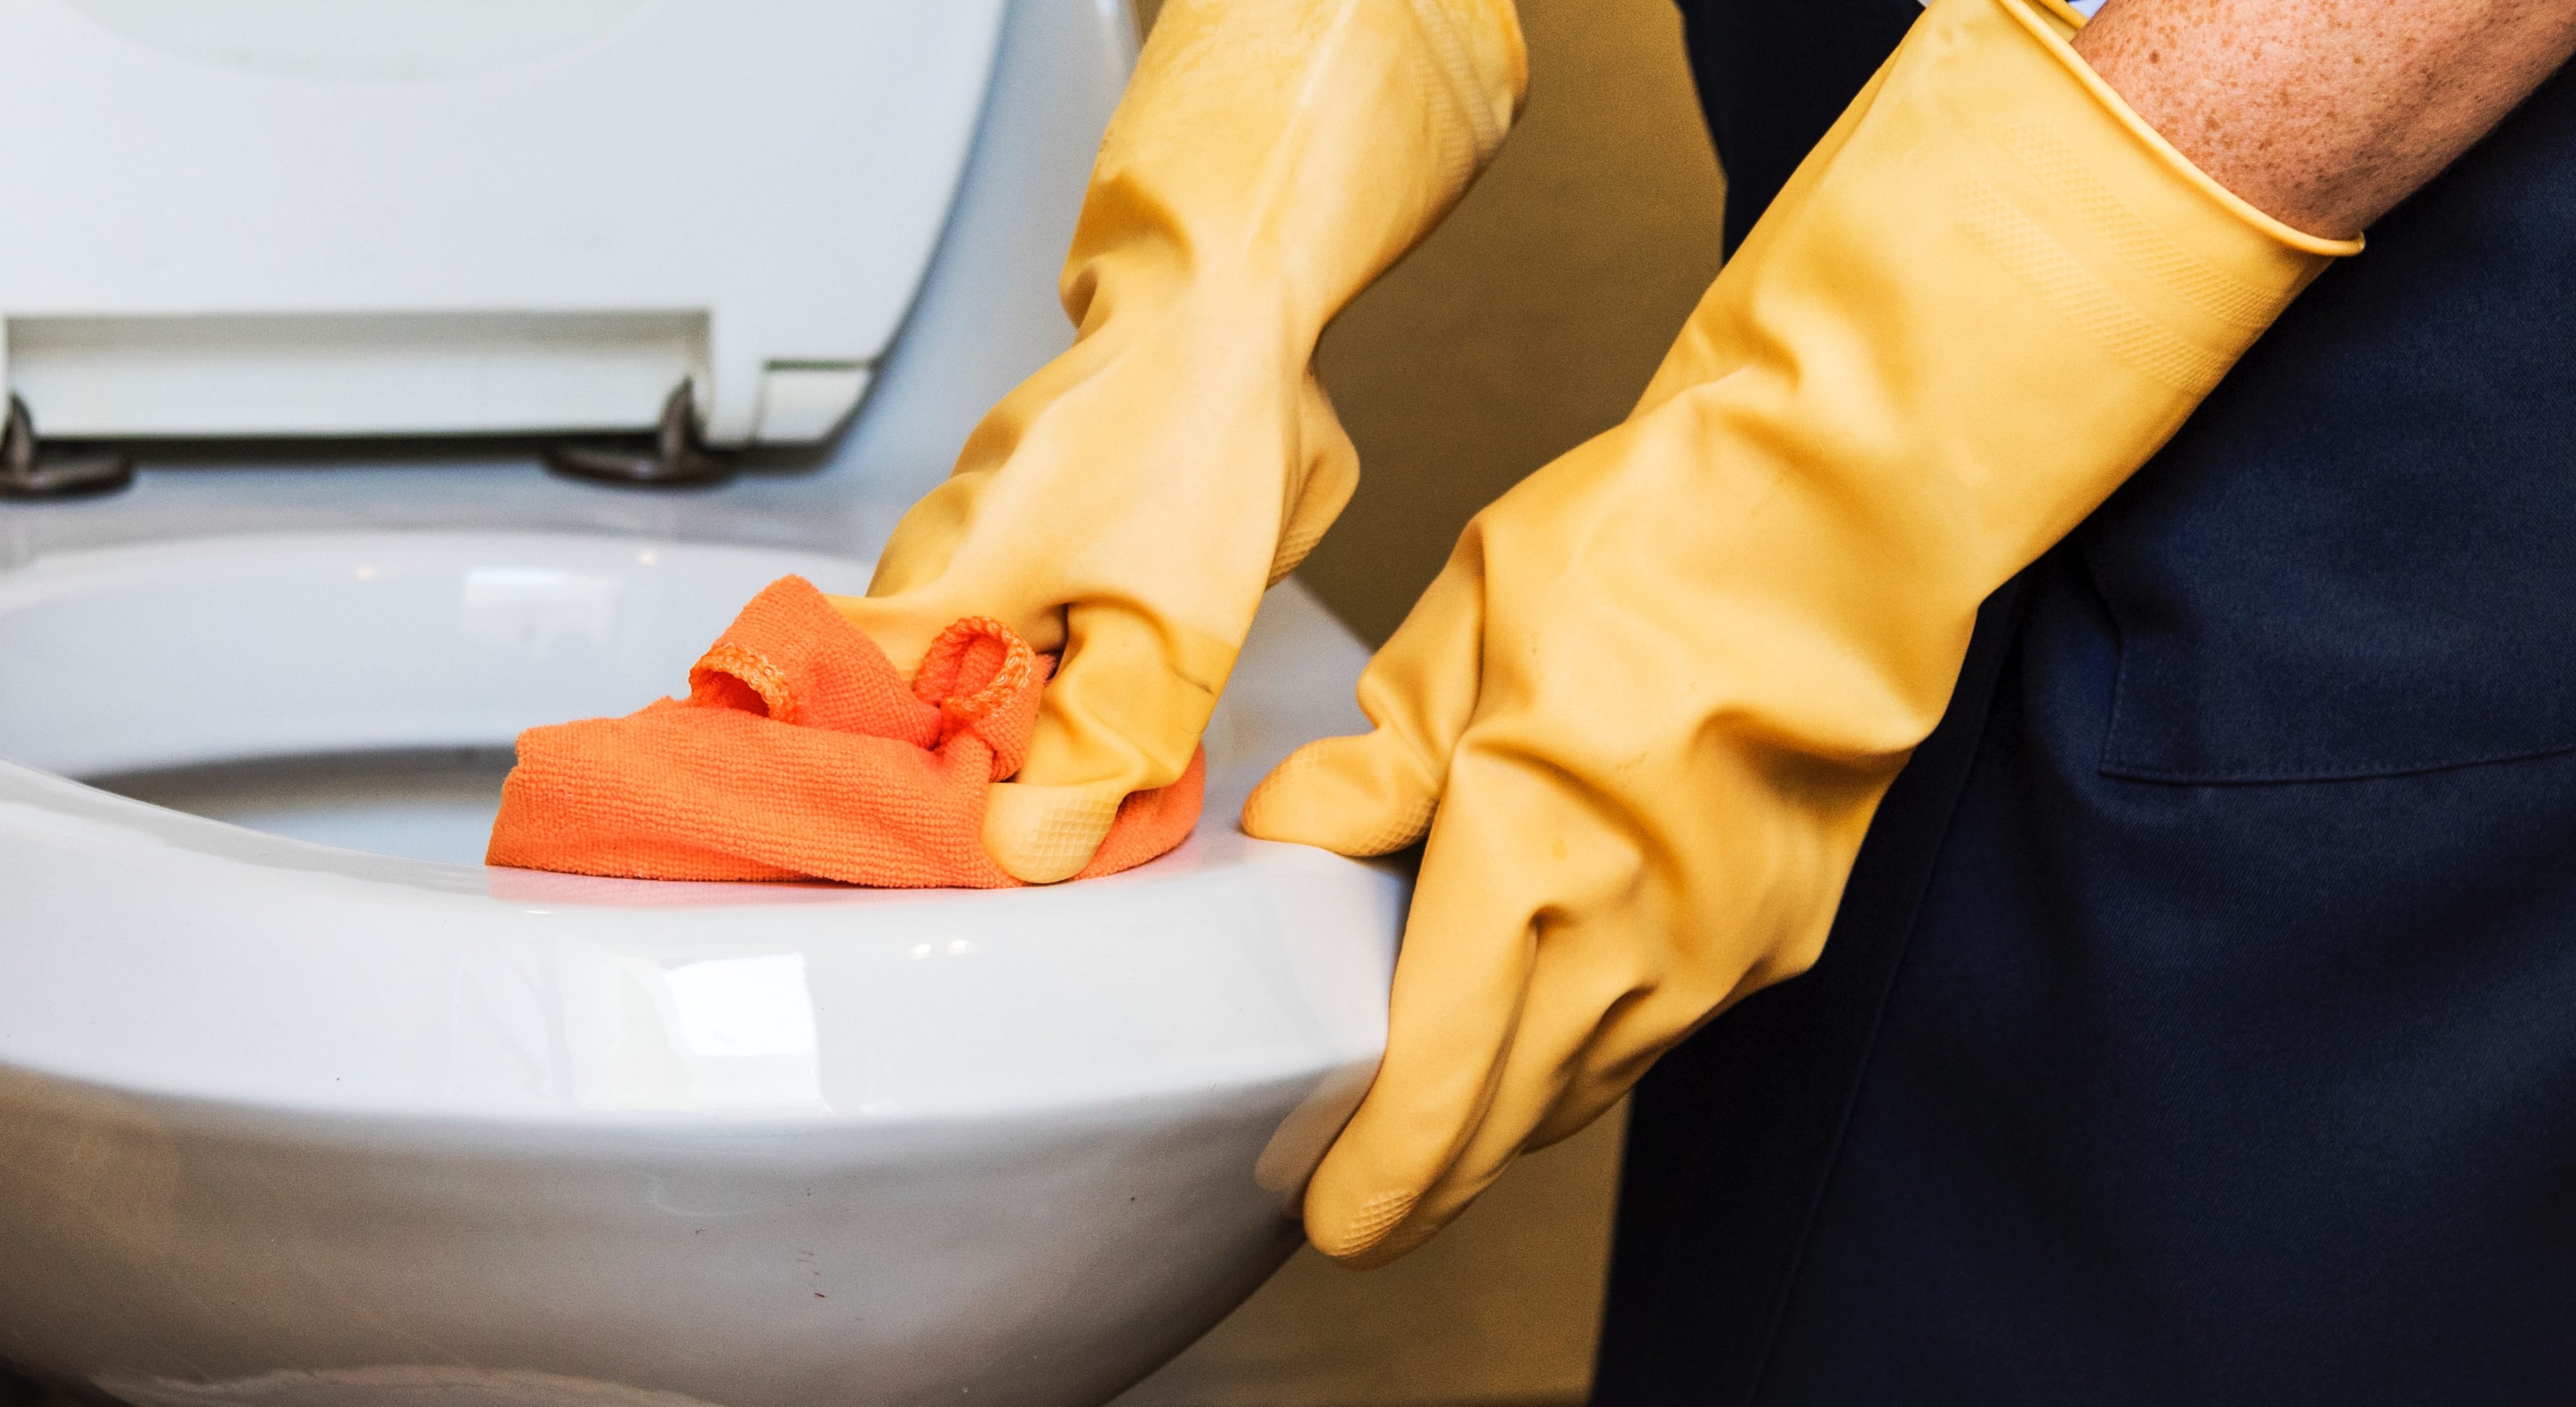 Rubber gloved hands scrubbing a toilet